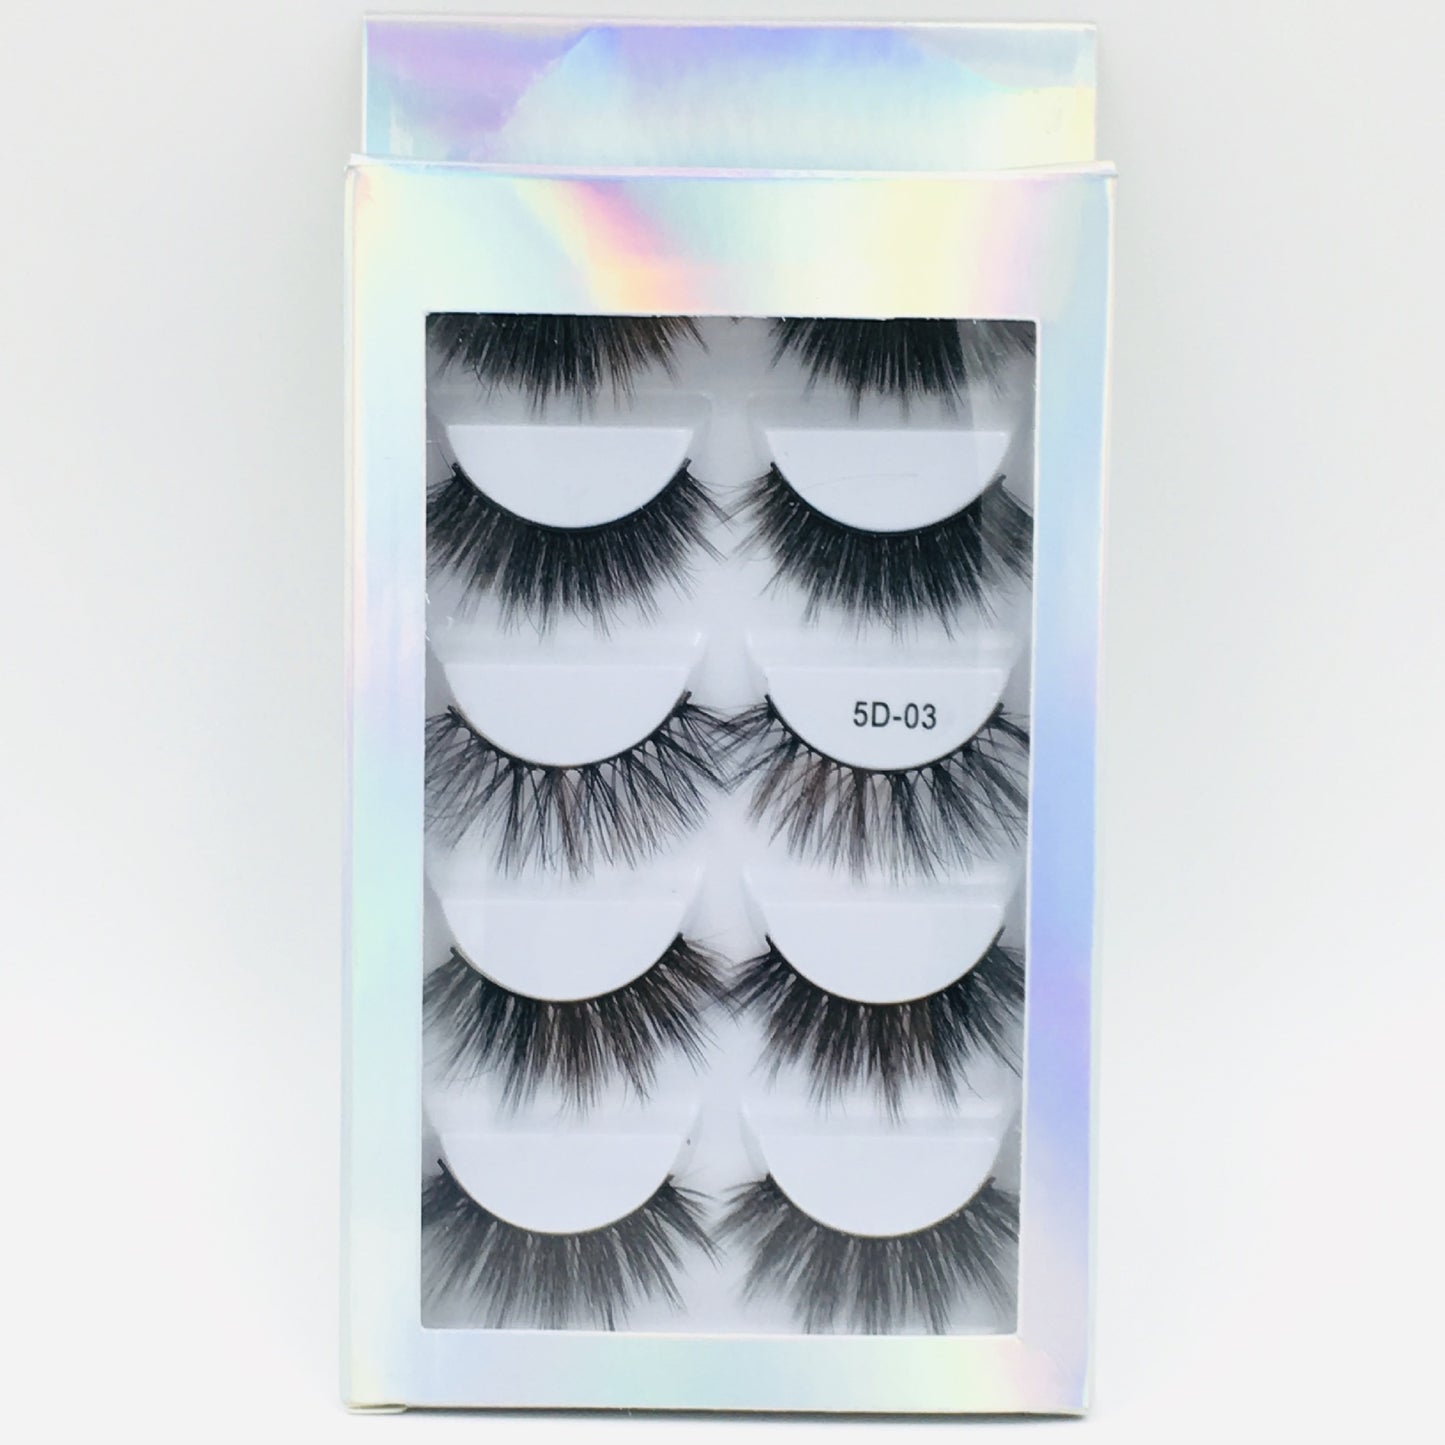 A - 5 Pairs 3D Laser Mink Synethic 25mm Natural Look Faux Eyelashes high quality